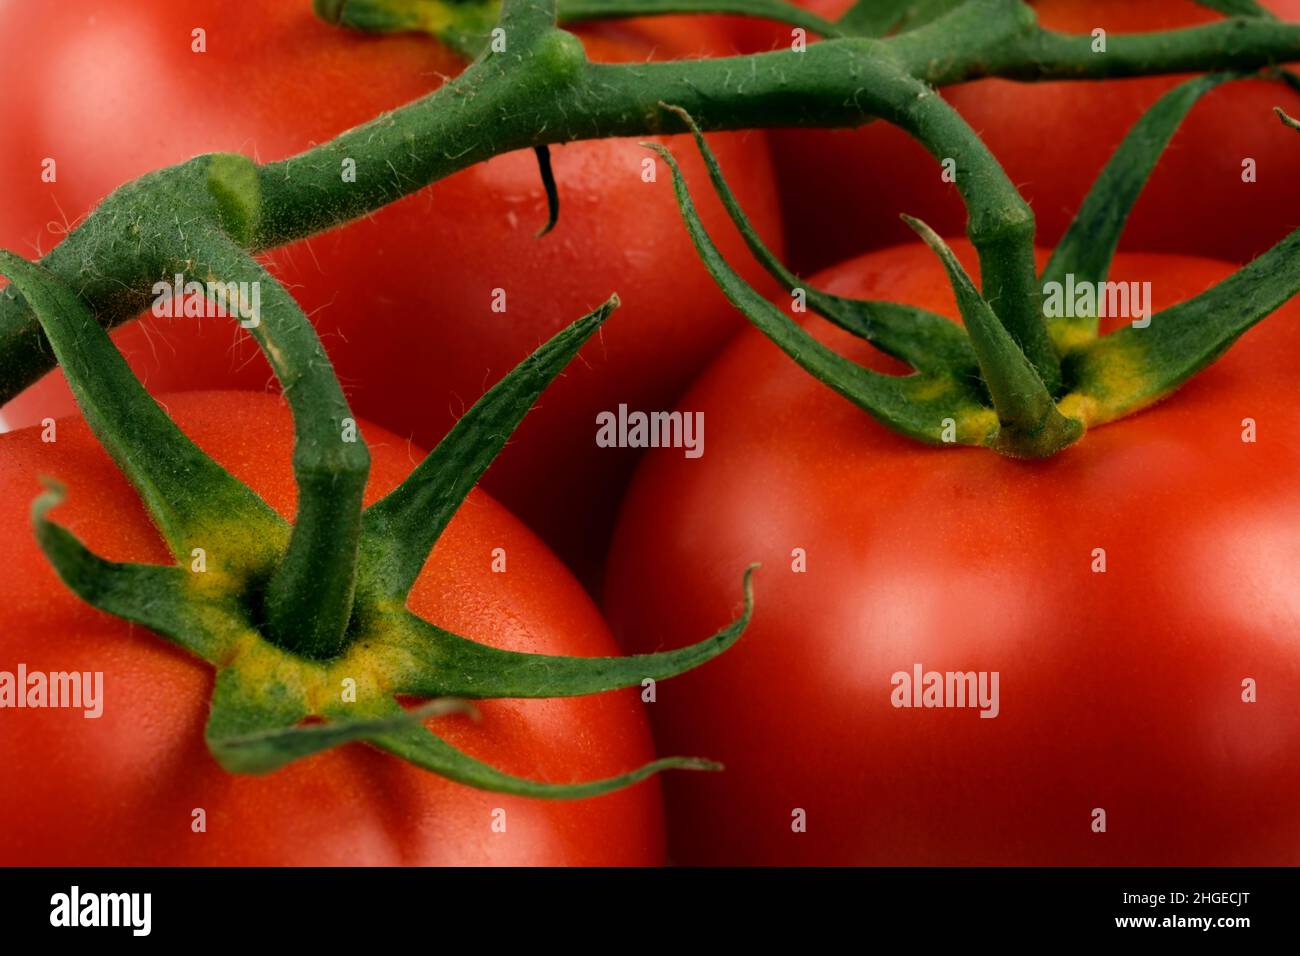 Close up shot of cluster tomatoes. Stock Photo